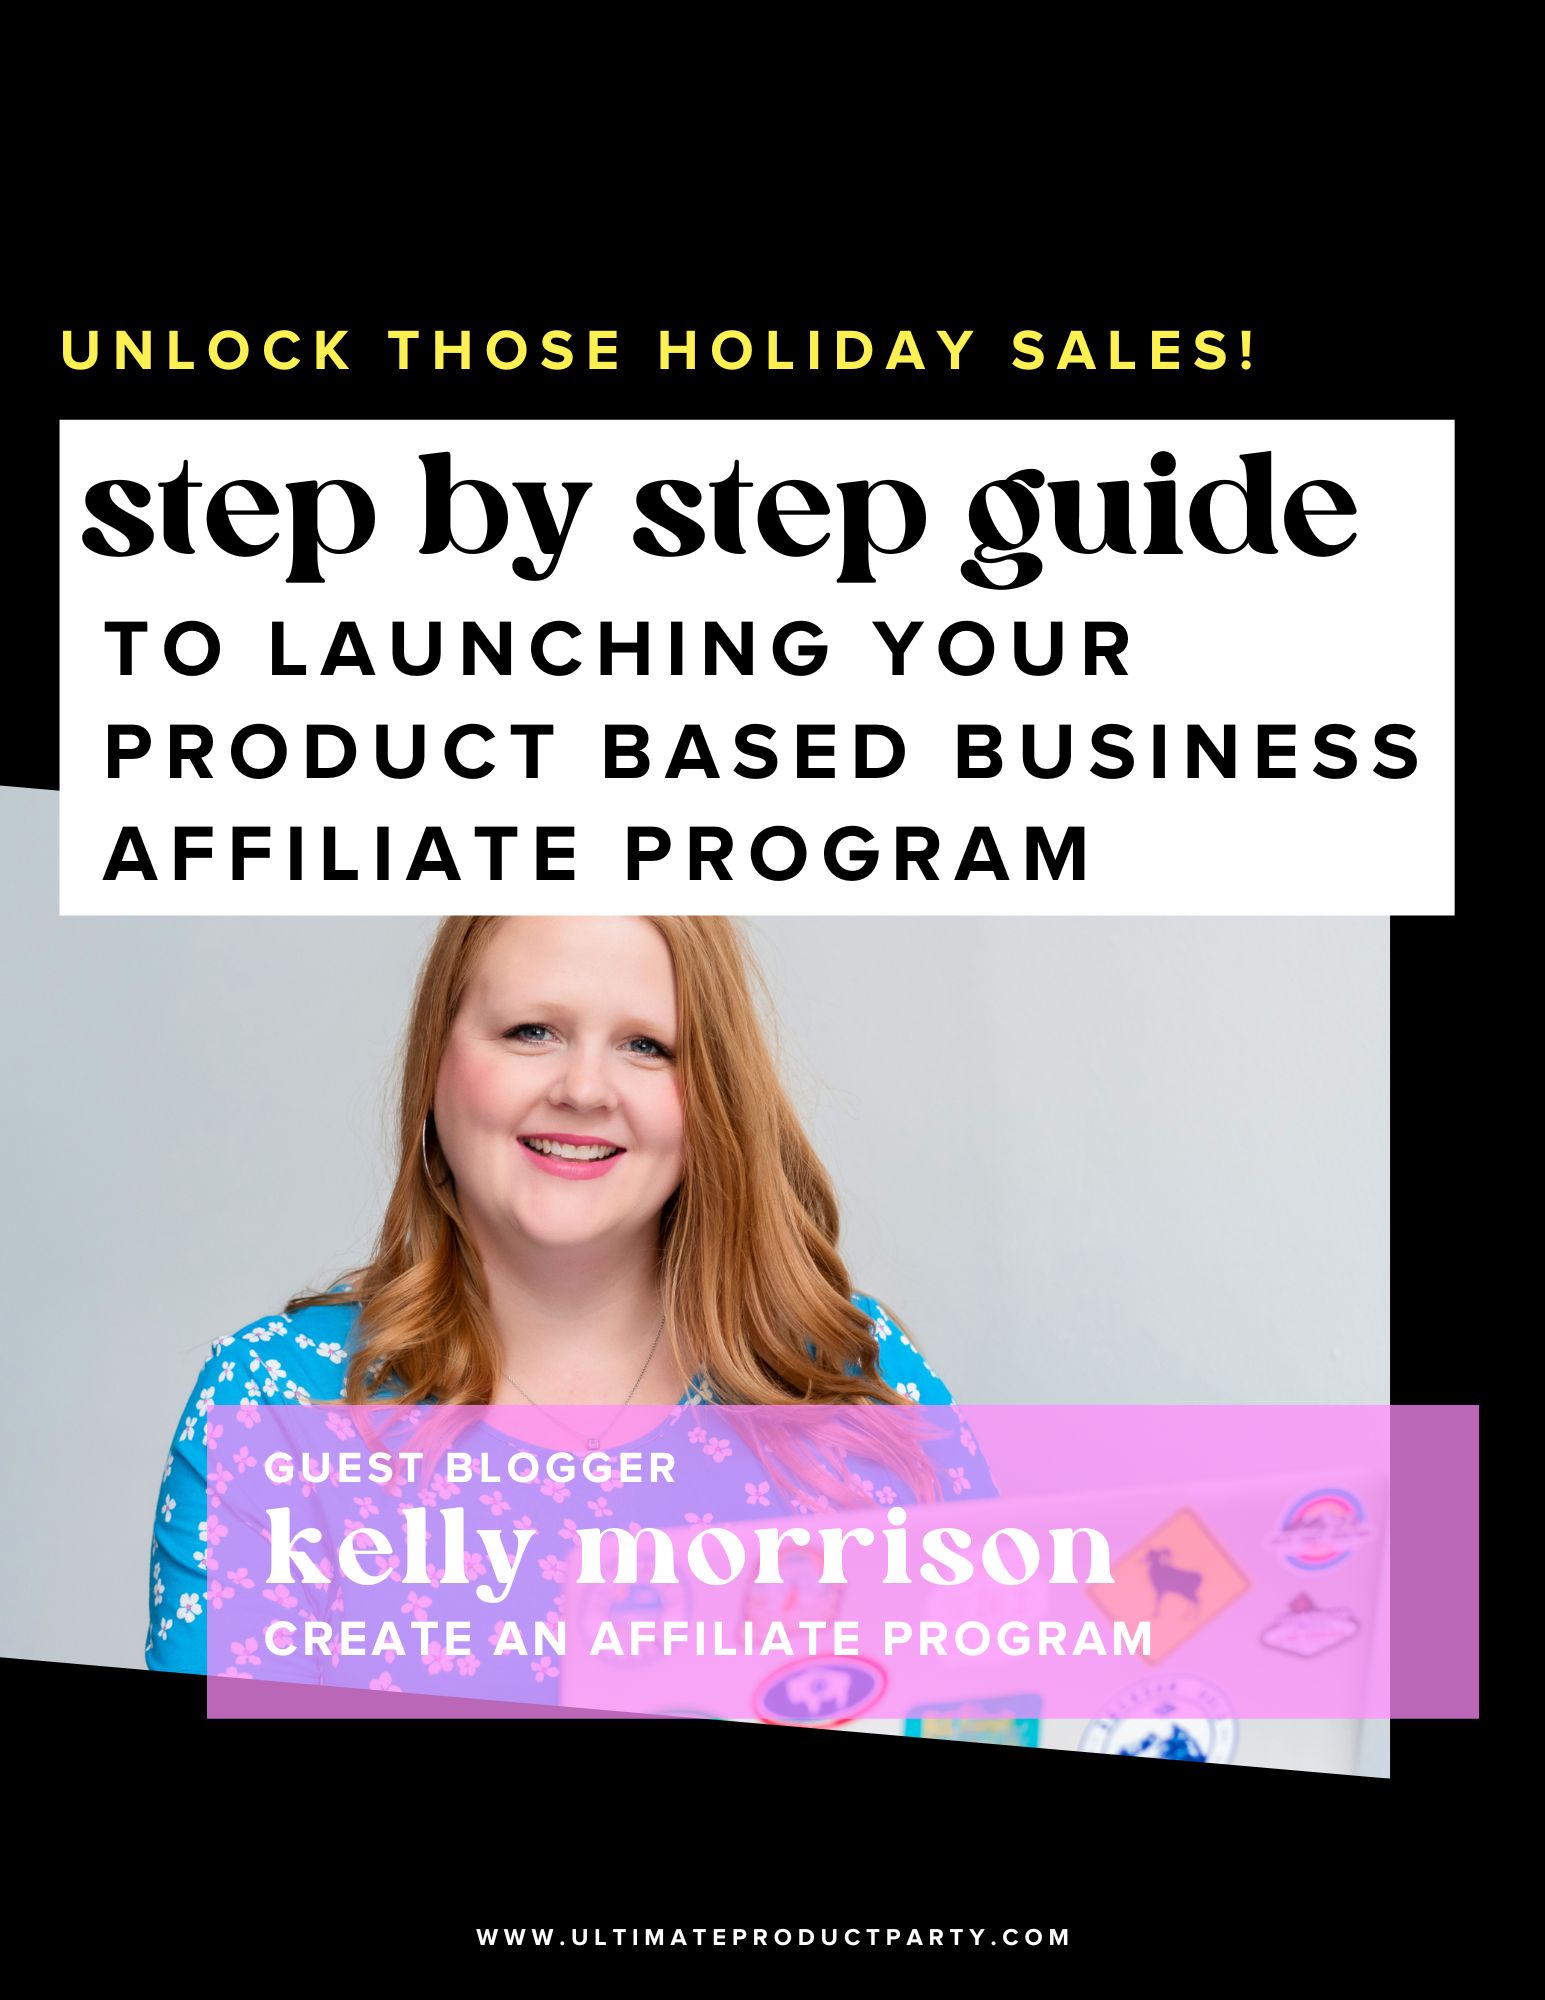 Elevate your holiday sales with our expert guide on creating a profitable affiliate program for your product-based business. Learn how to boost revenue and build partnerships during the holiday season and black friday